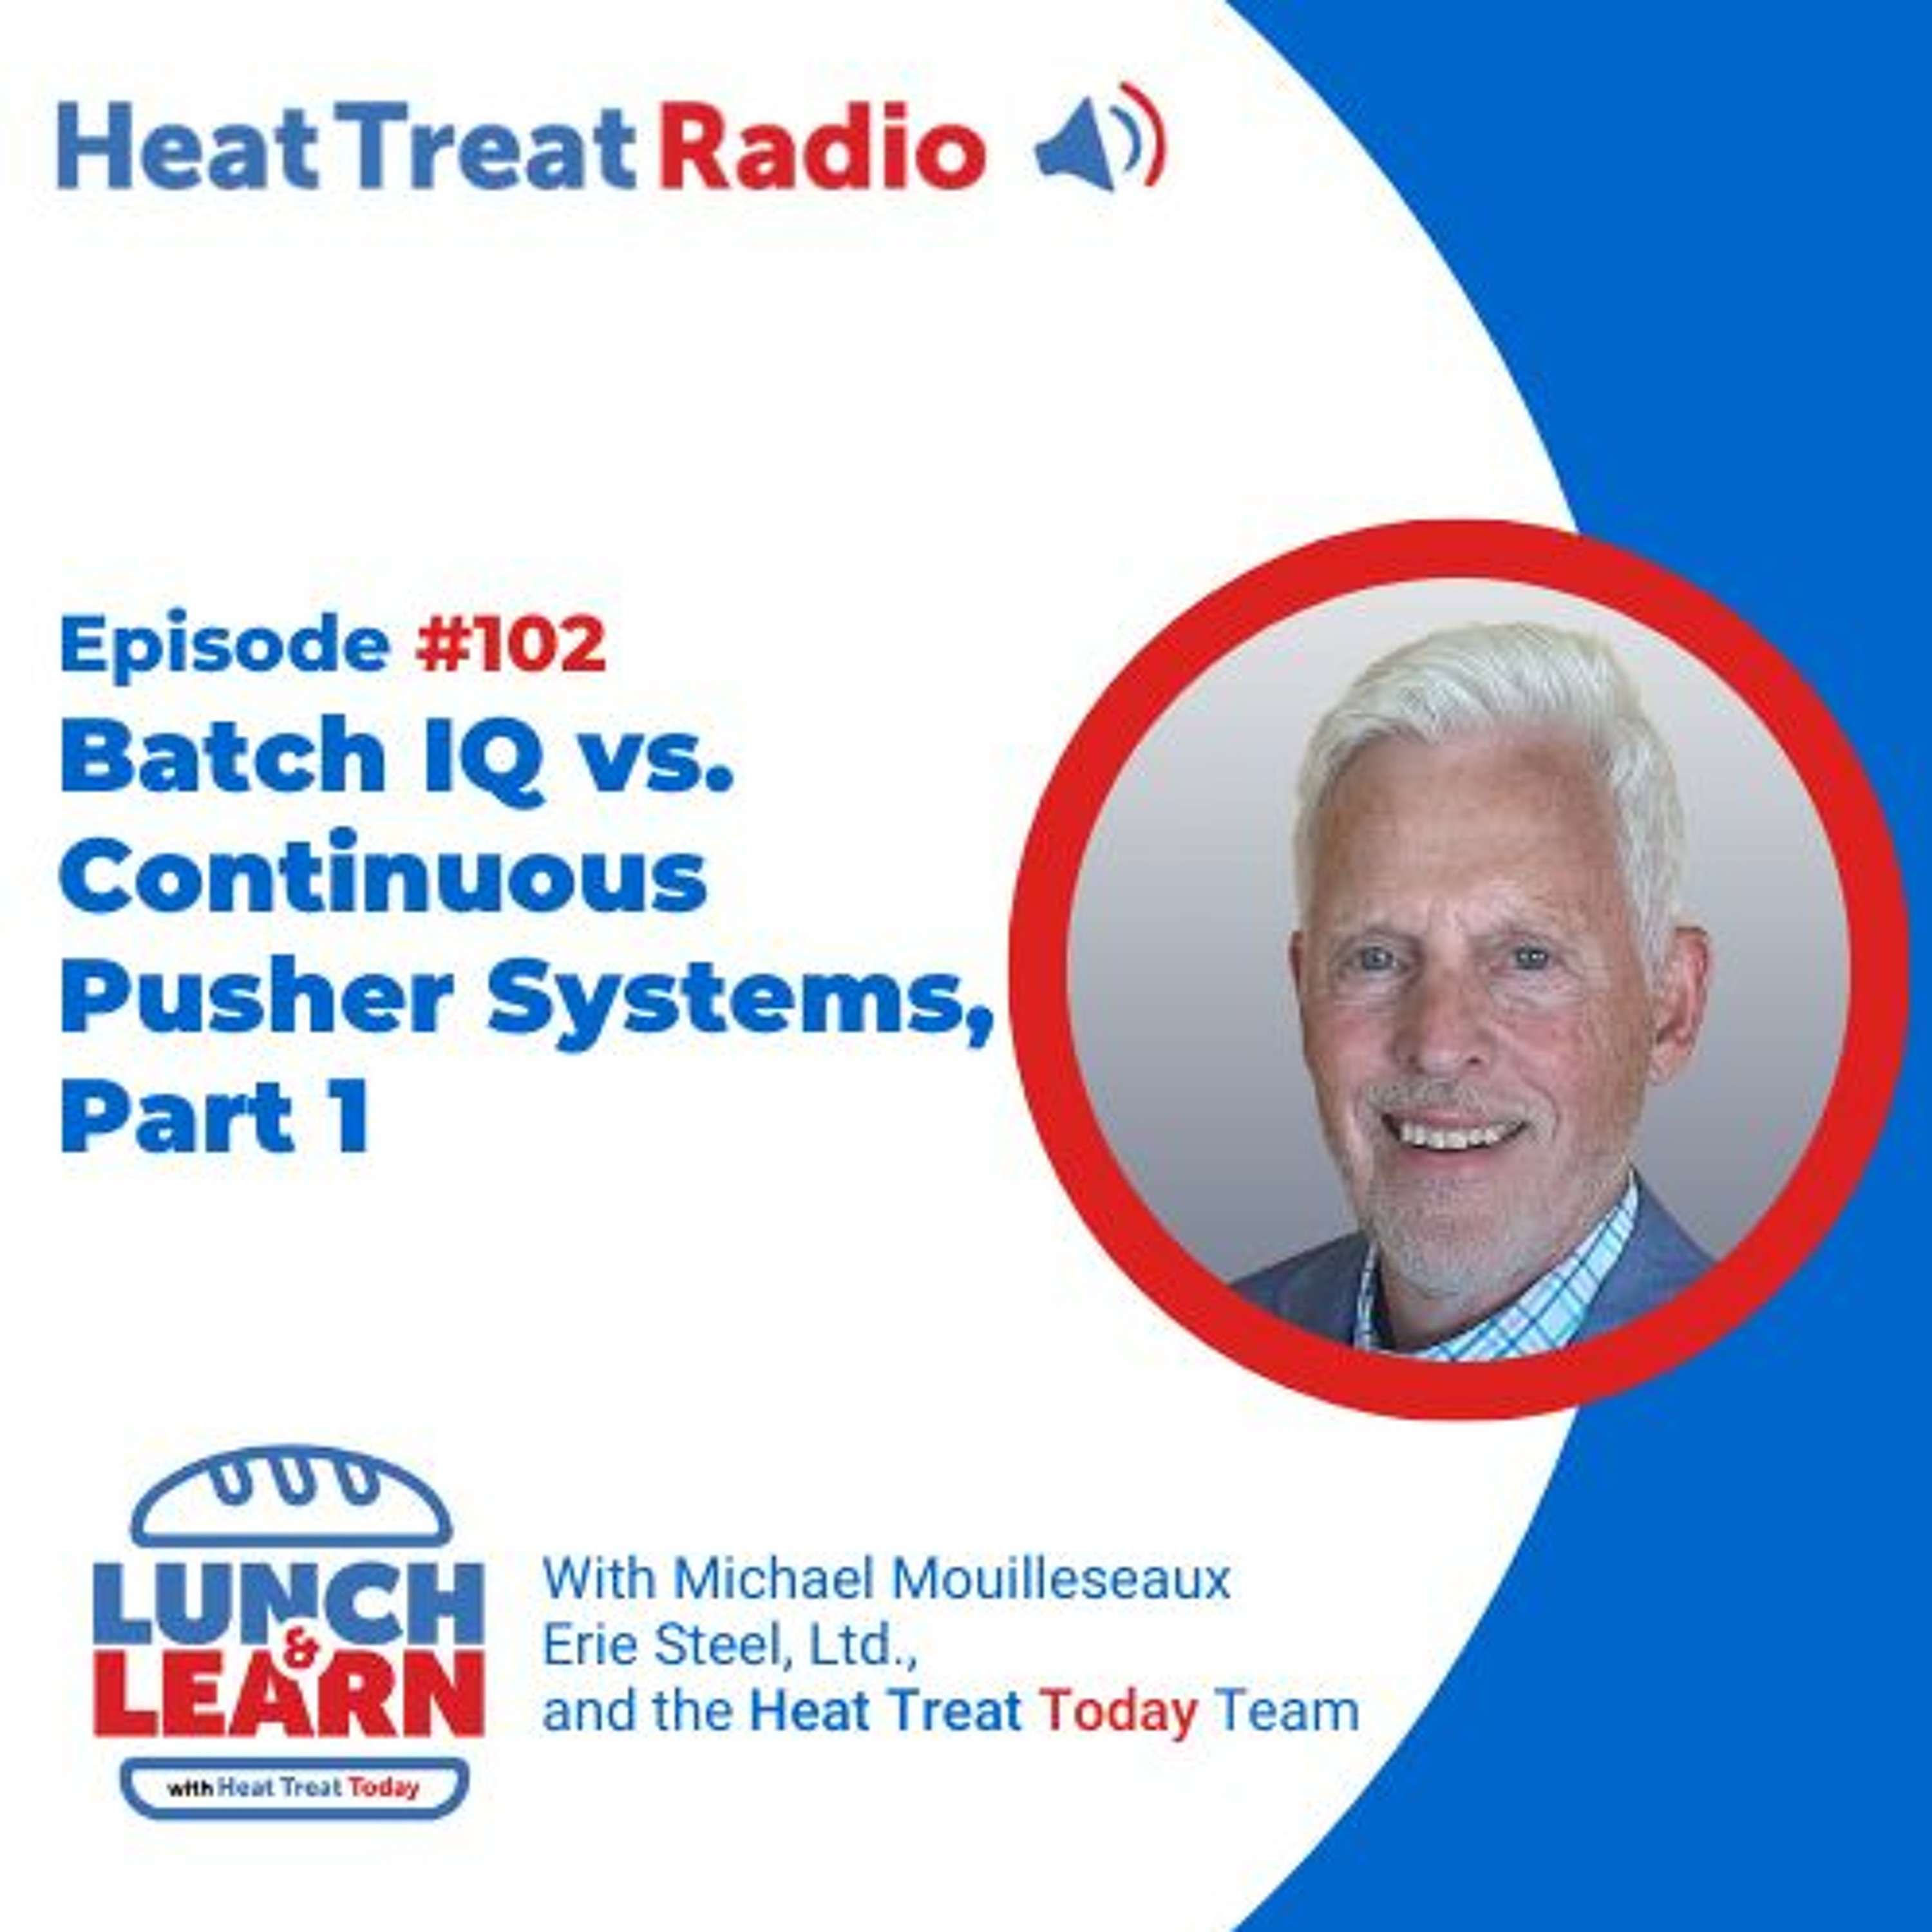 Heat Treat Radio #102: Lunch & Learn, Batch IQ vs. Continuous Pusher Systems Part 1